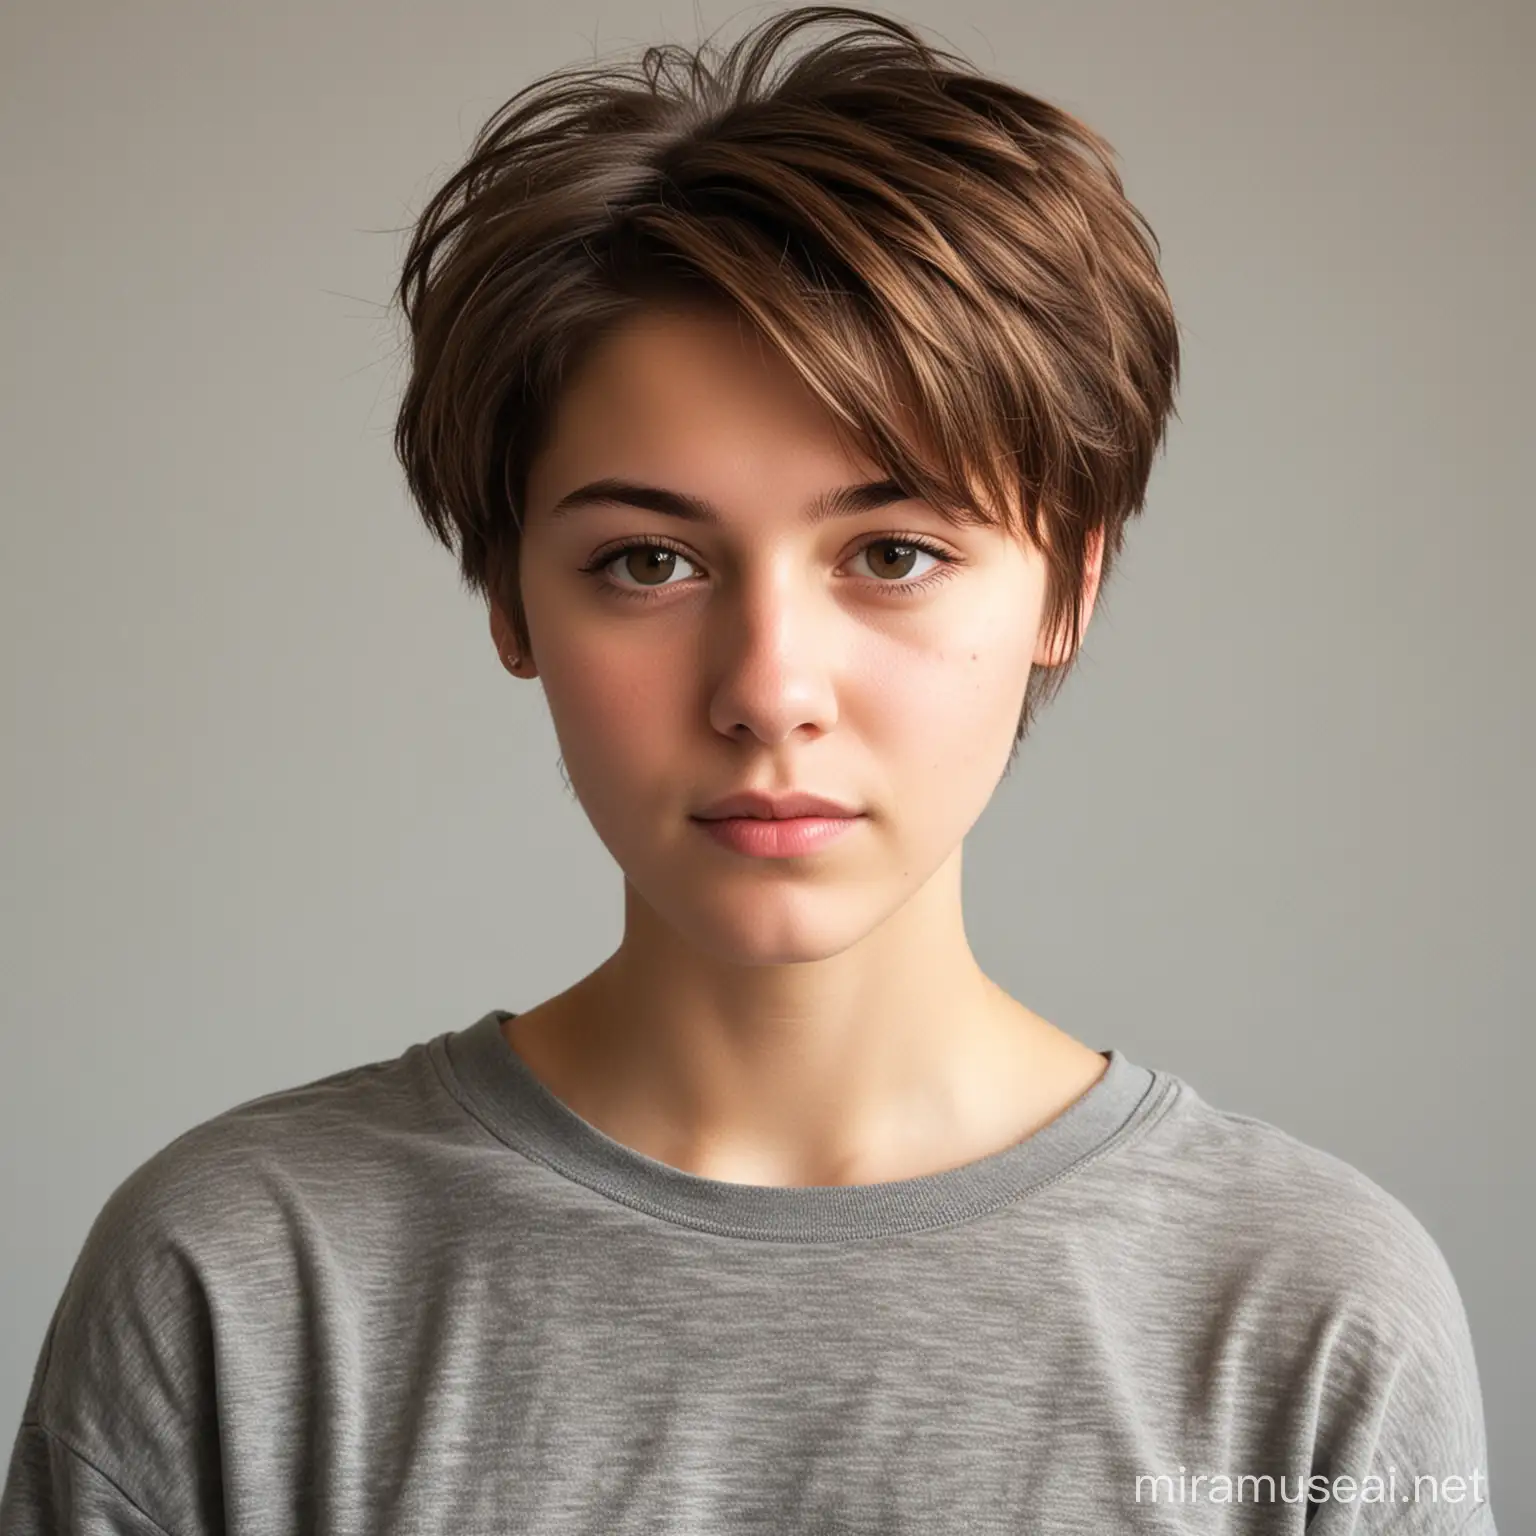 A young lady. She was 18 years old. She's a tomboy. She has brown hair. Her haircut is short saggy-cut